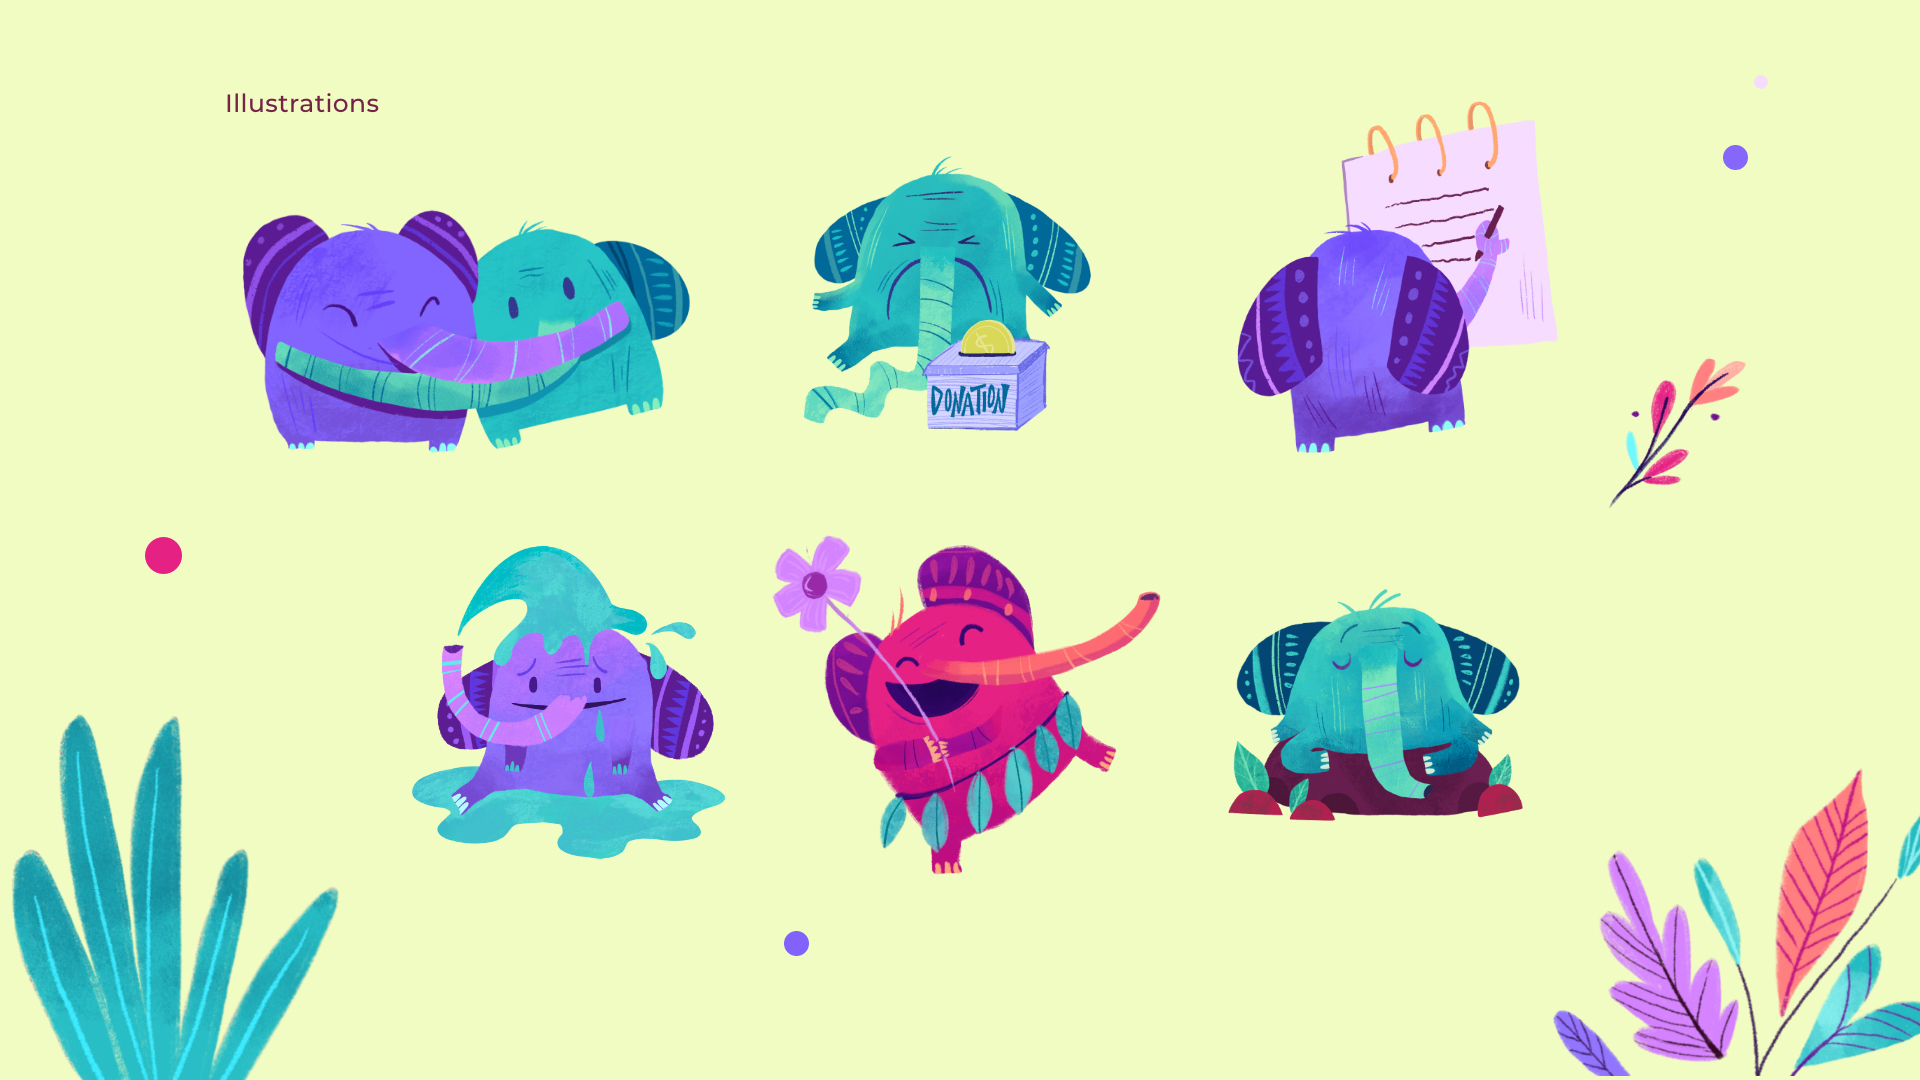 A computer drawing of green, purple and red cartoon elephants that are doing different activities like hugging, playing, relaxing, taking a shower or taking notes.